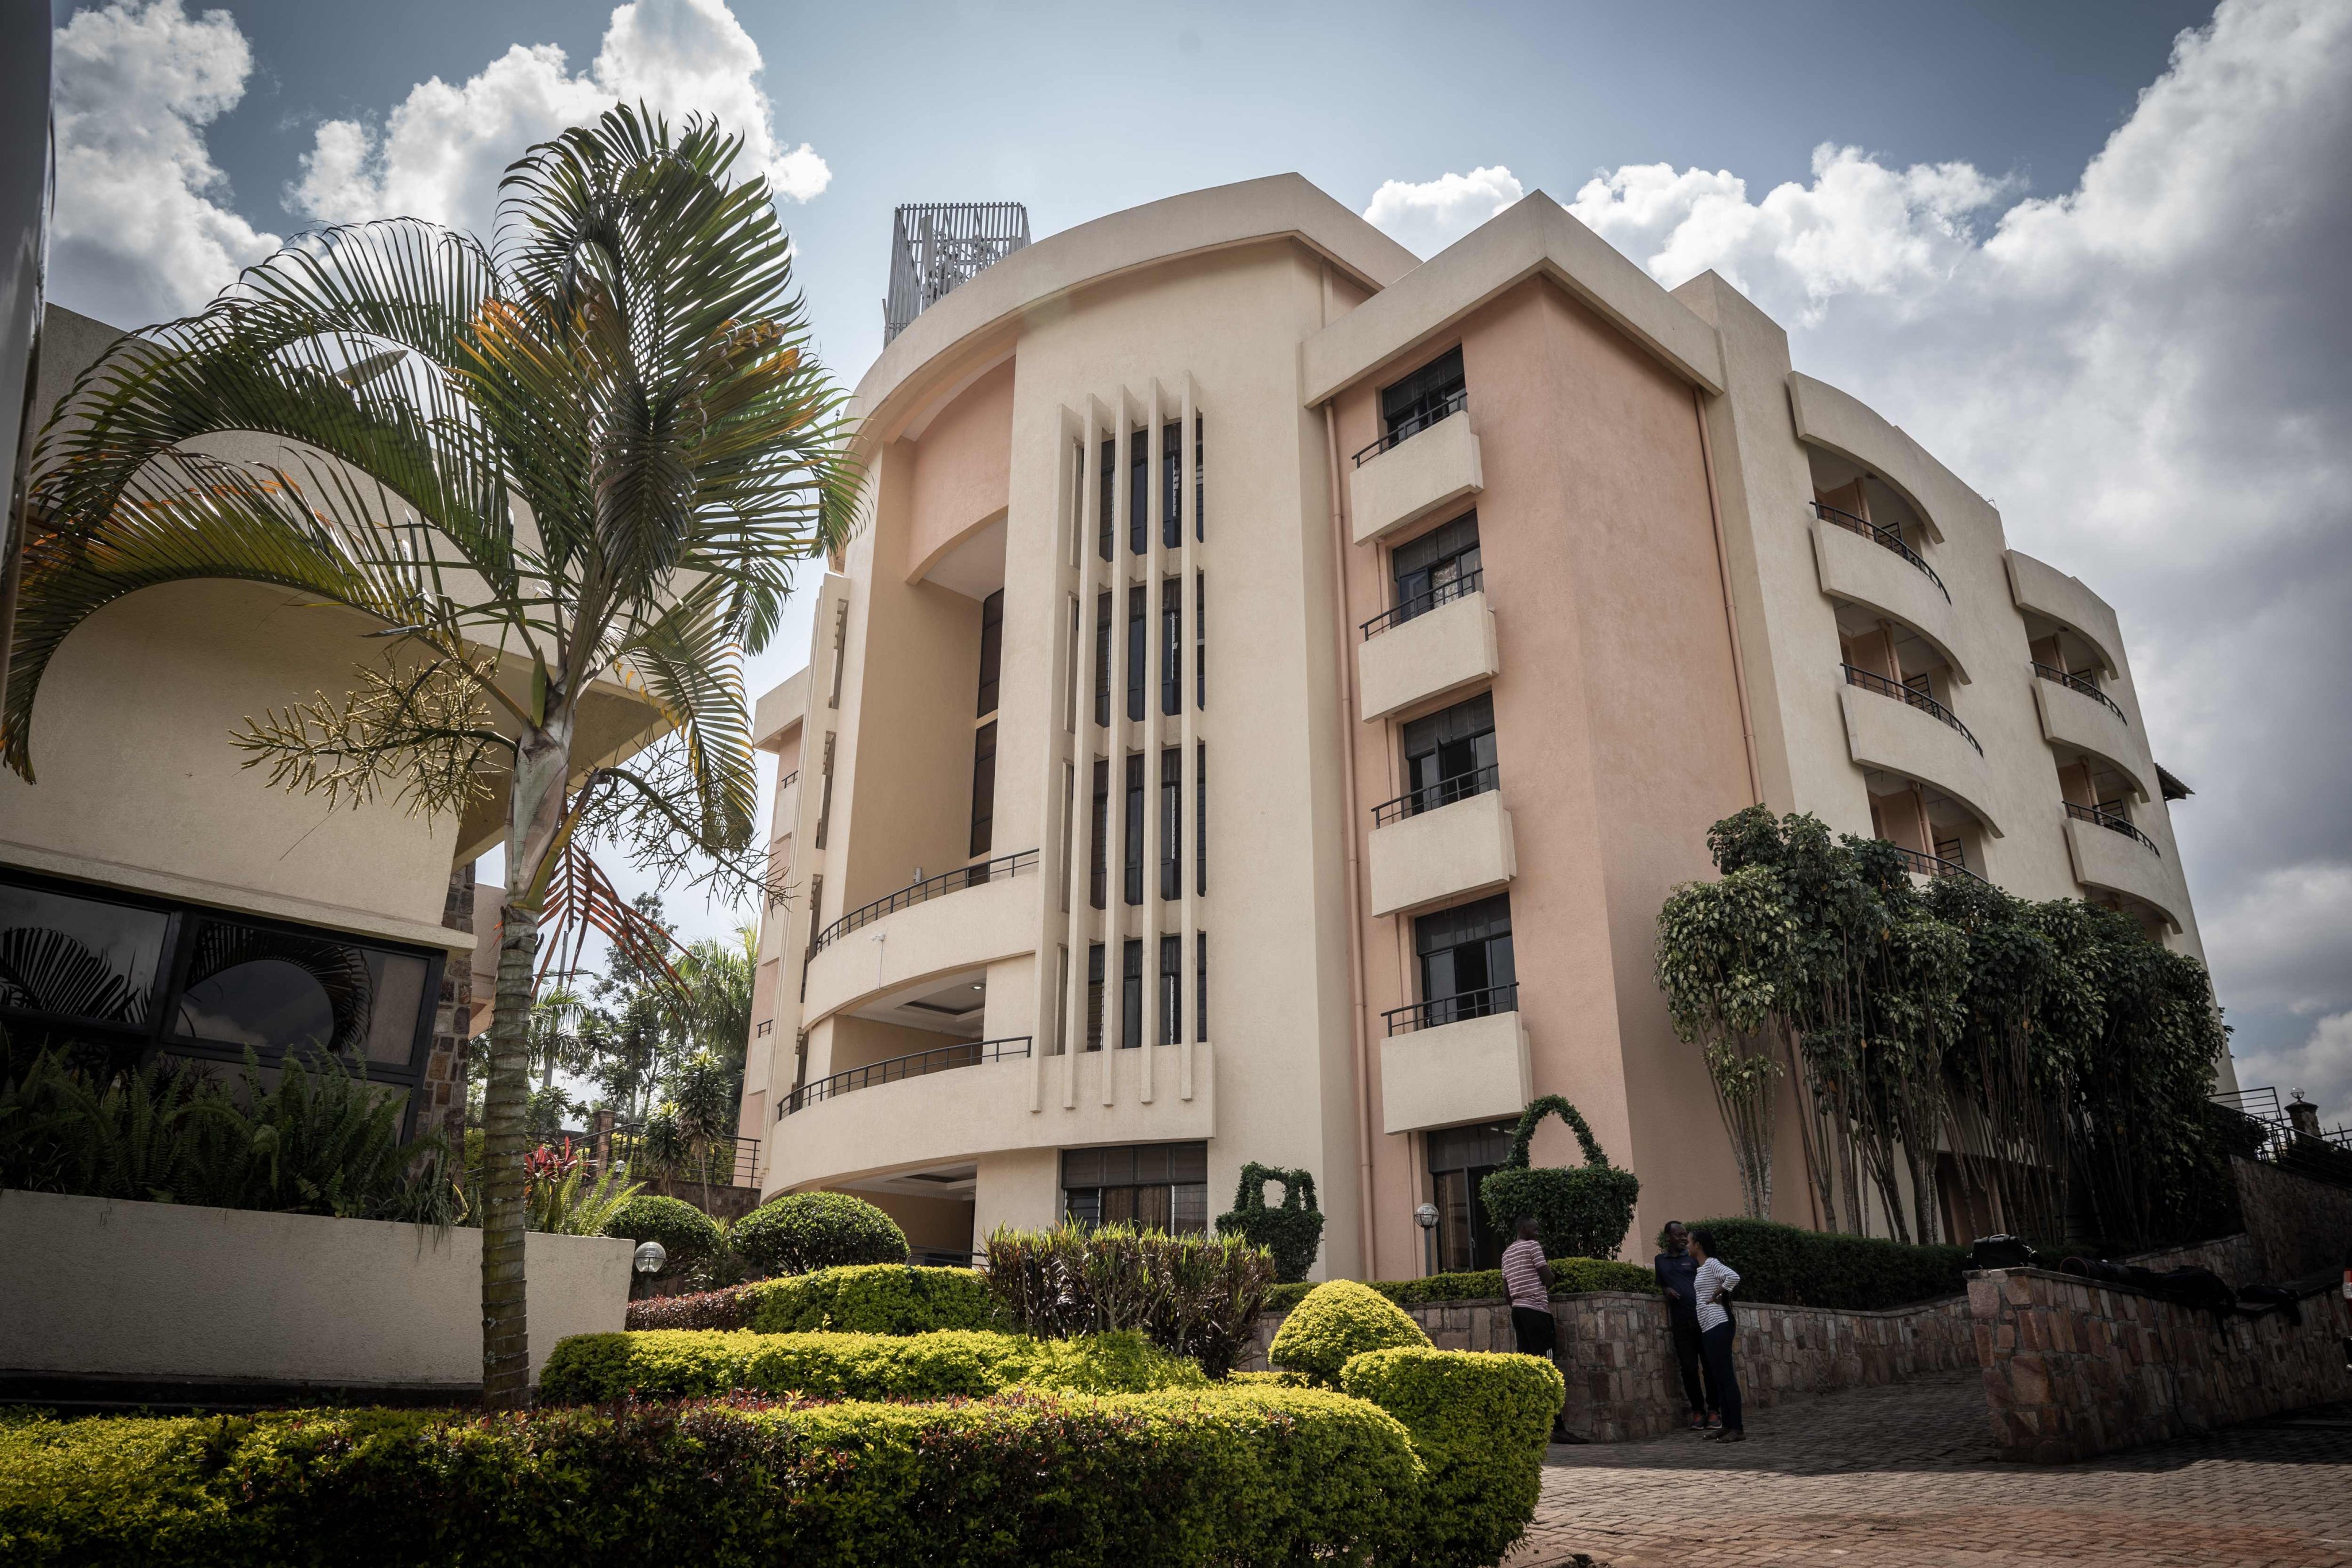 A building in Kigali, Rwanda, that was intended to house migrants deported from the UK. Photo: AFP